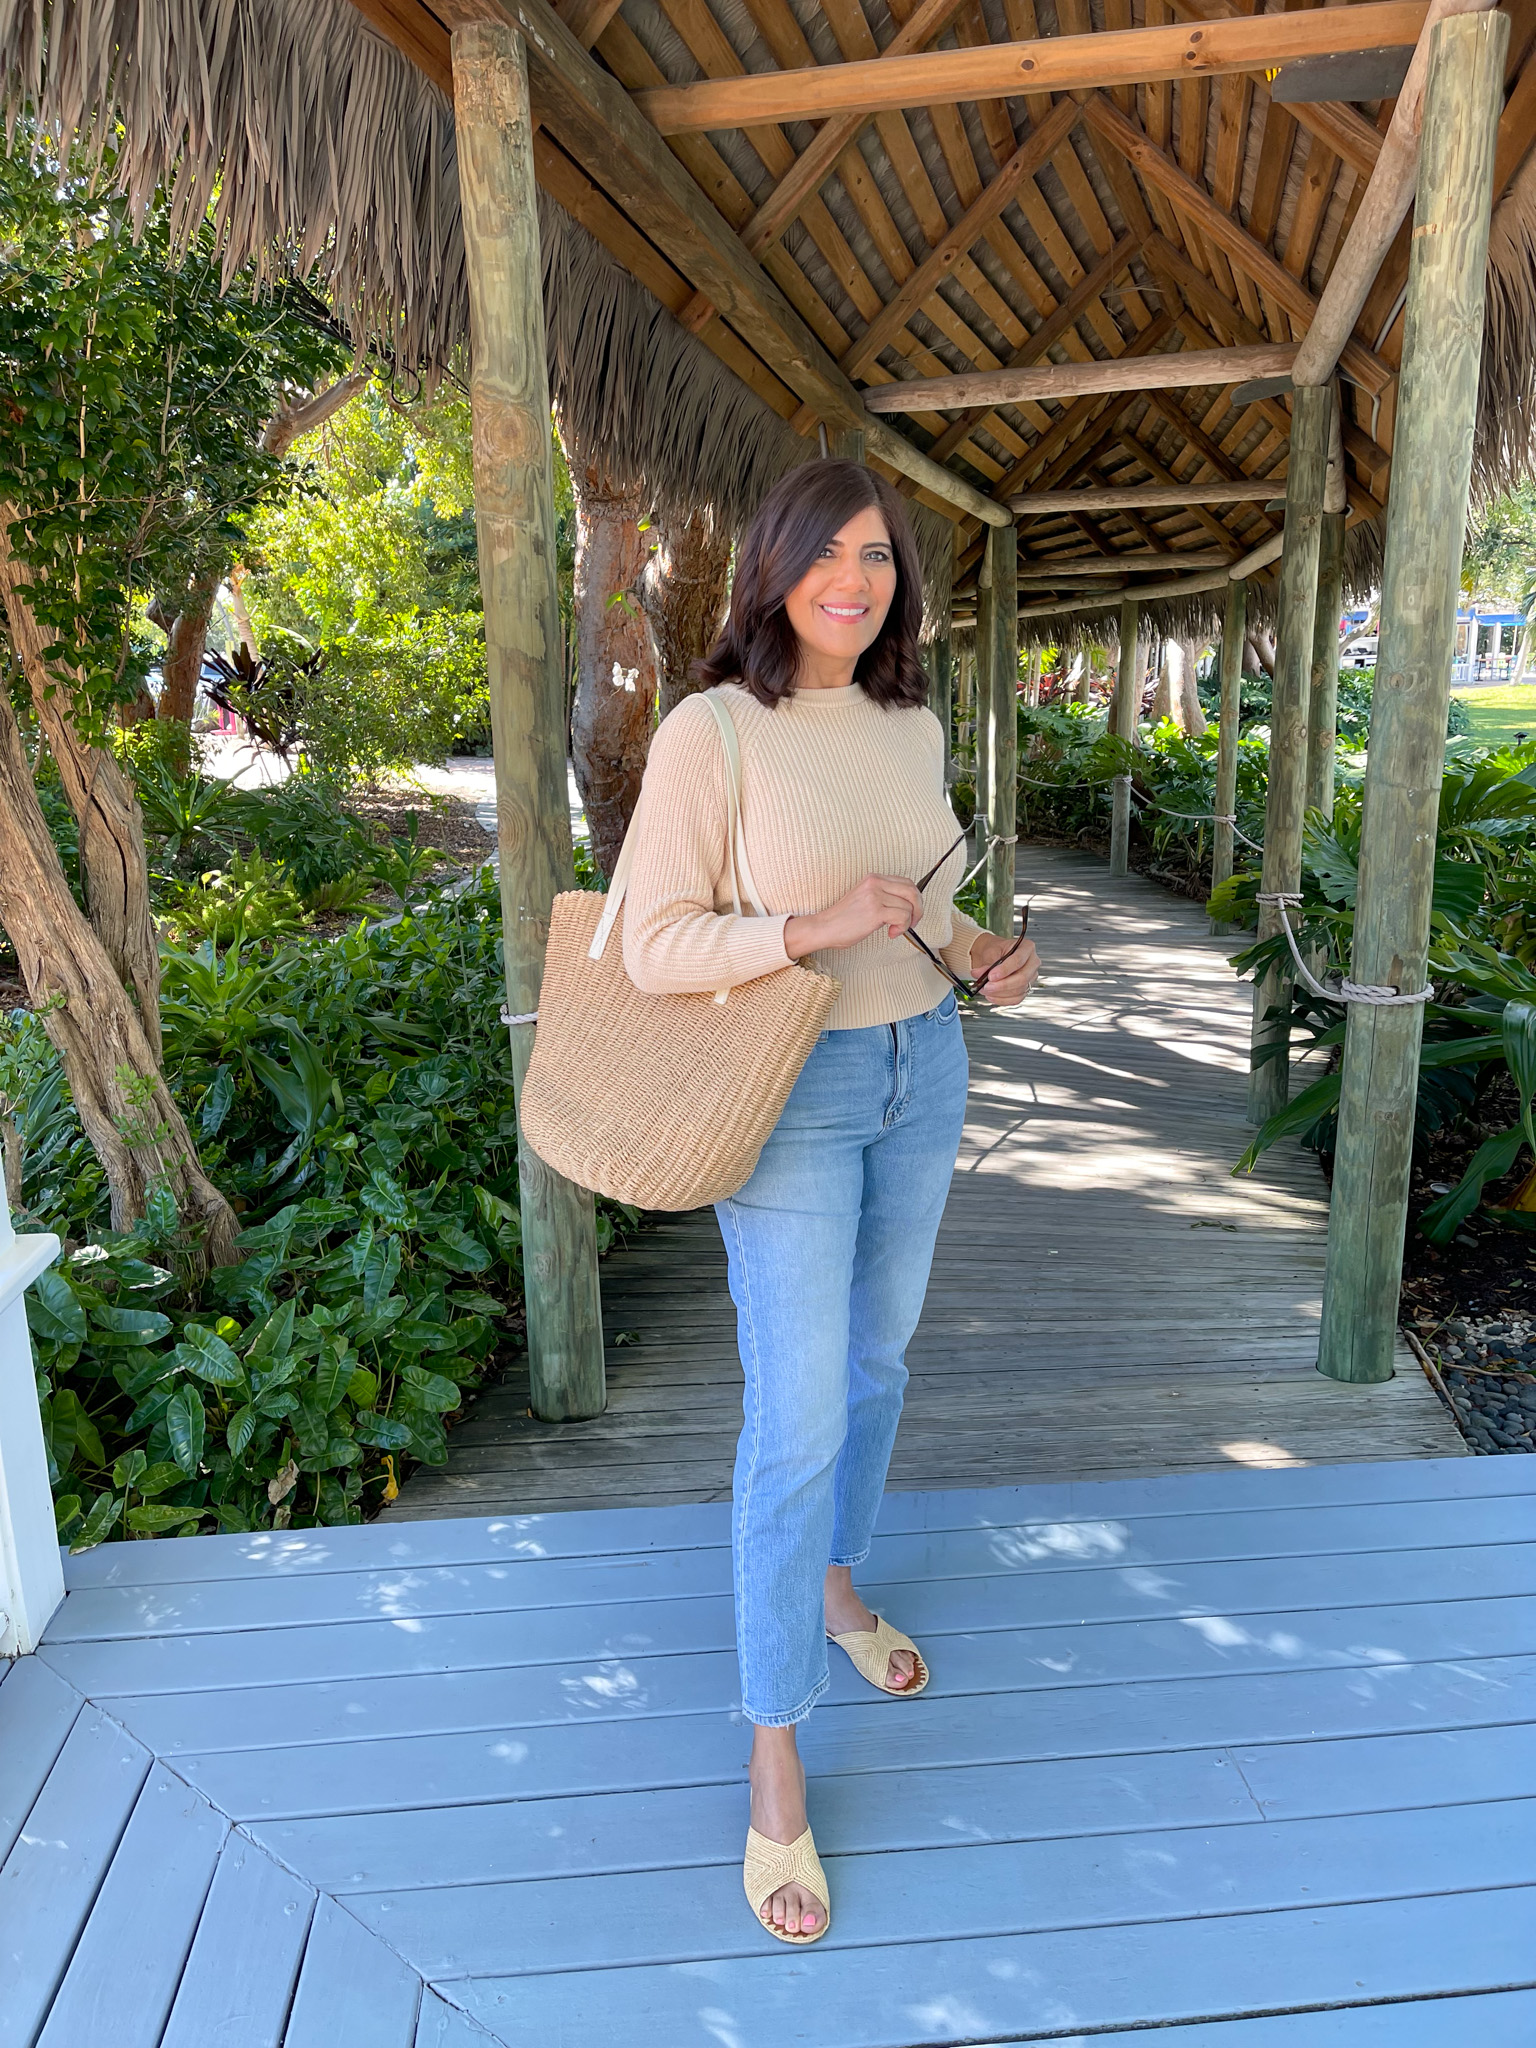 Desiree Leone of Beautifully Seaside features lots of outfit ideas in this post featuring, 8 January style moments my readers enjoyed. 